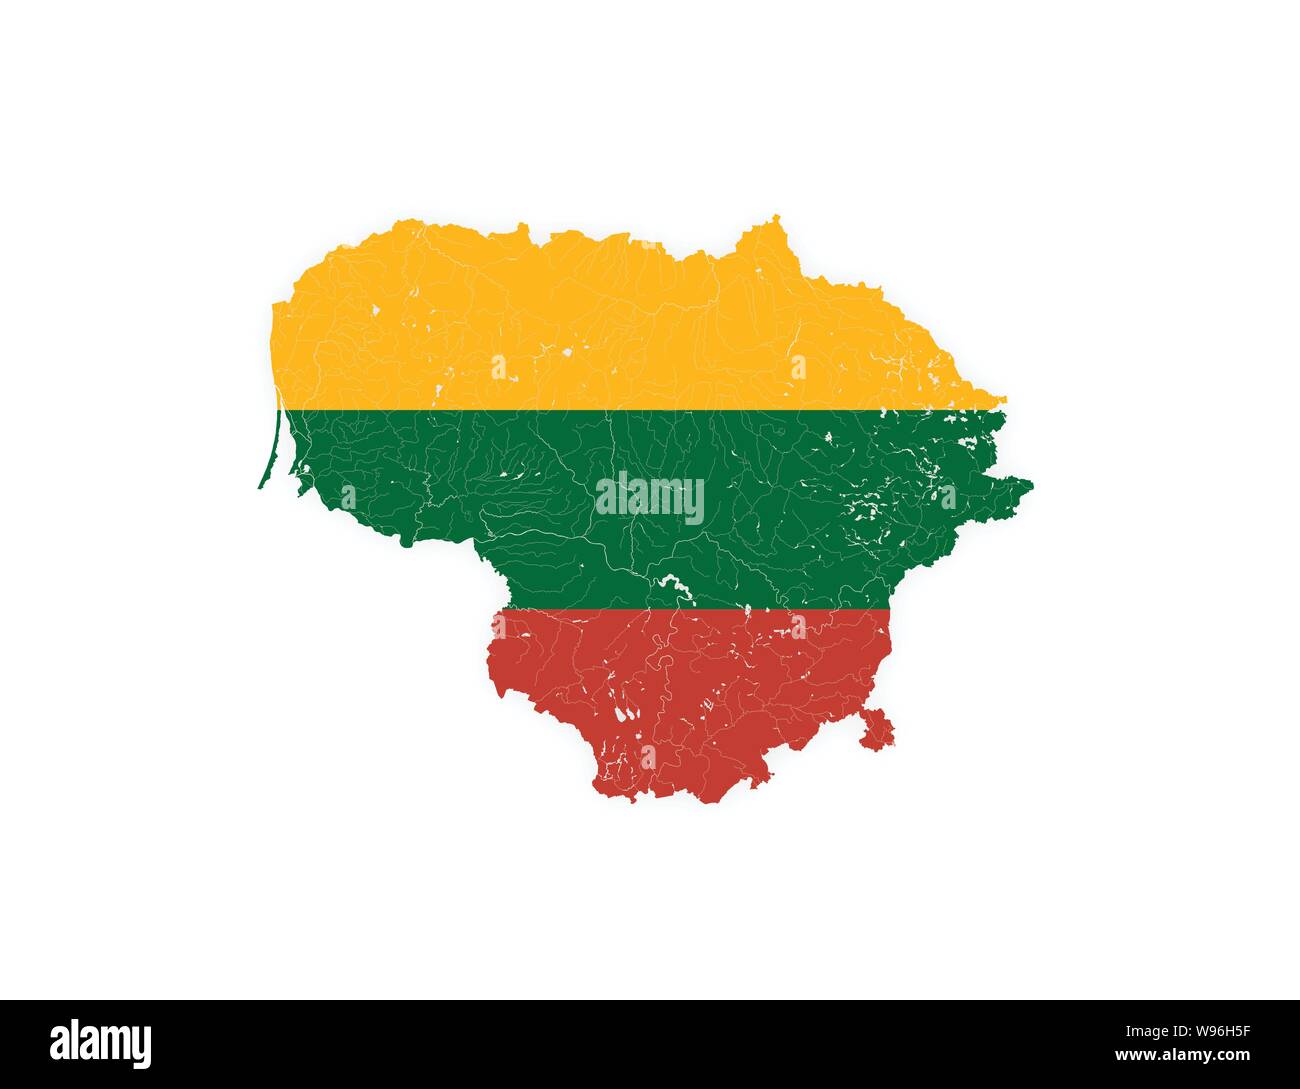 Map of Lithuania with rivers and lakes in colors of Lithuanian national flag. Please look at my other images of cartographic series - they are all ver Stock Vector